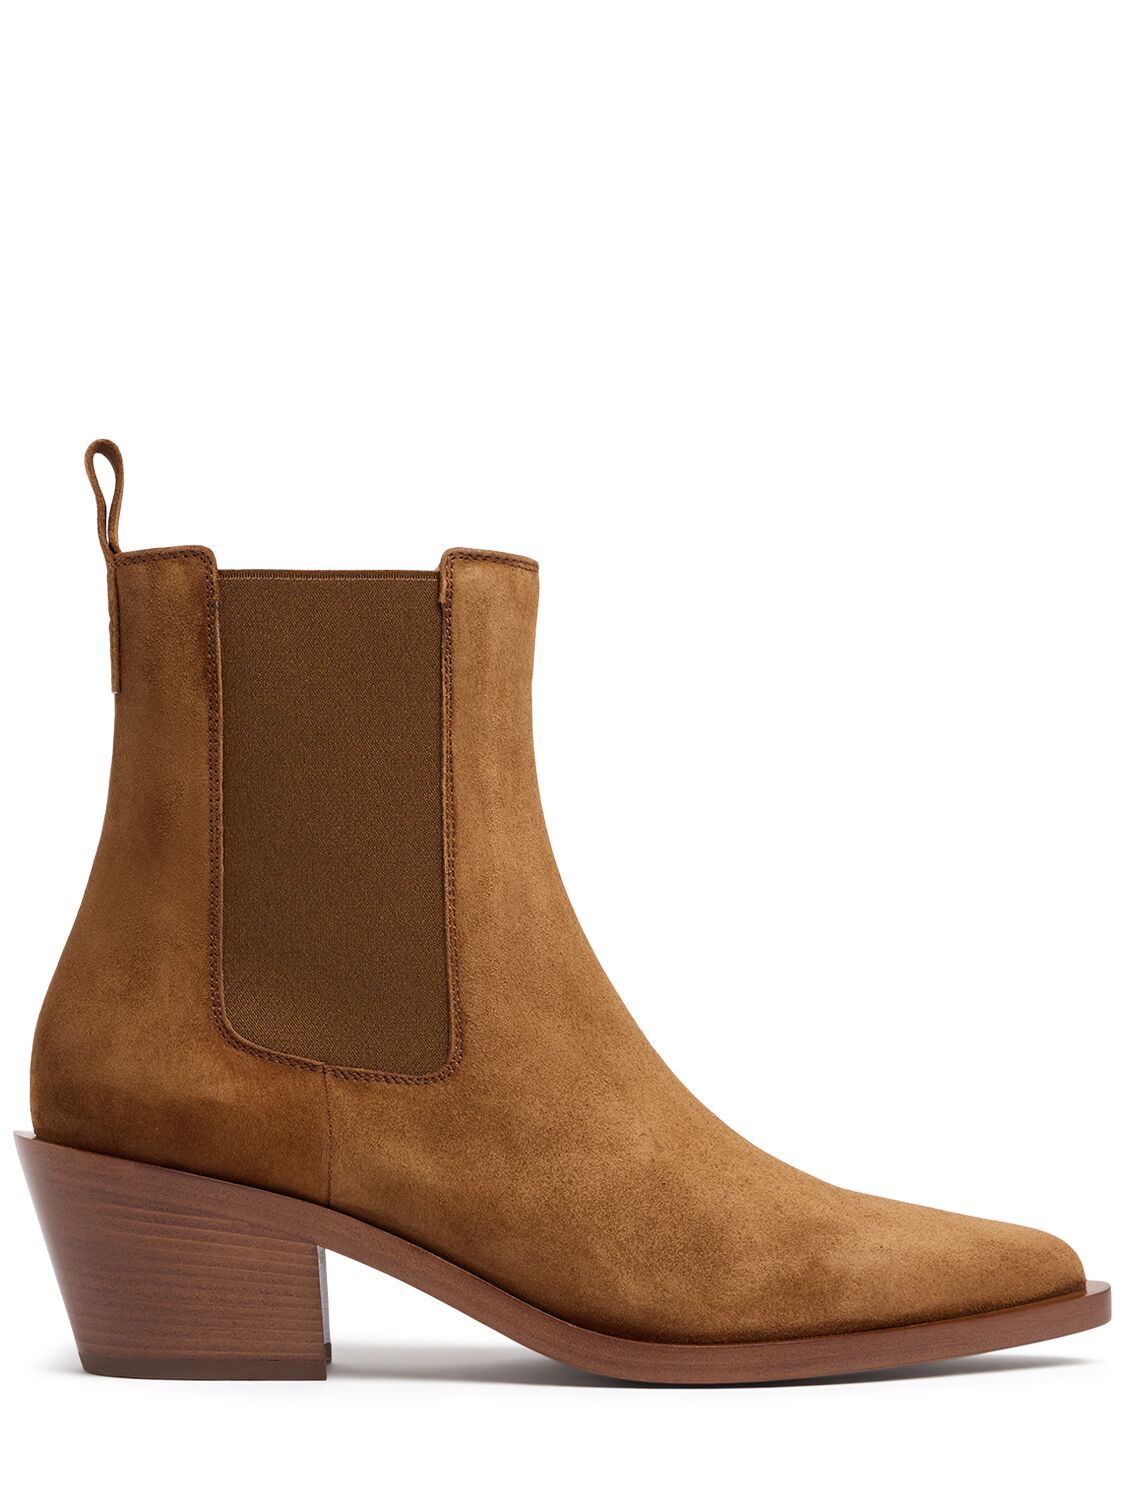 Gianvito Rossi 45mm Suede Ankle Boots In Camel